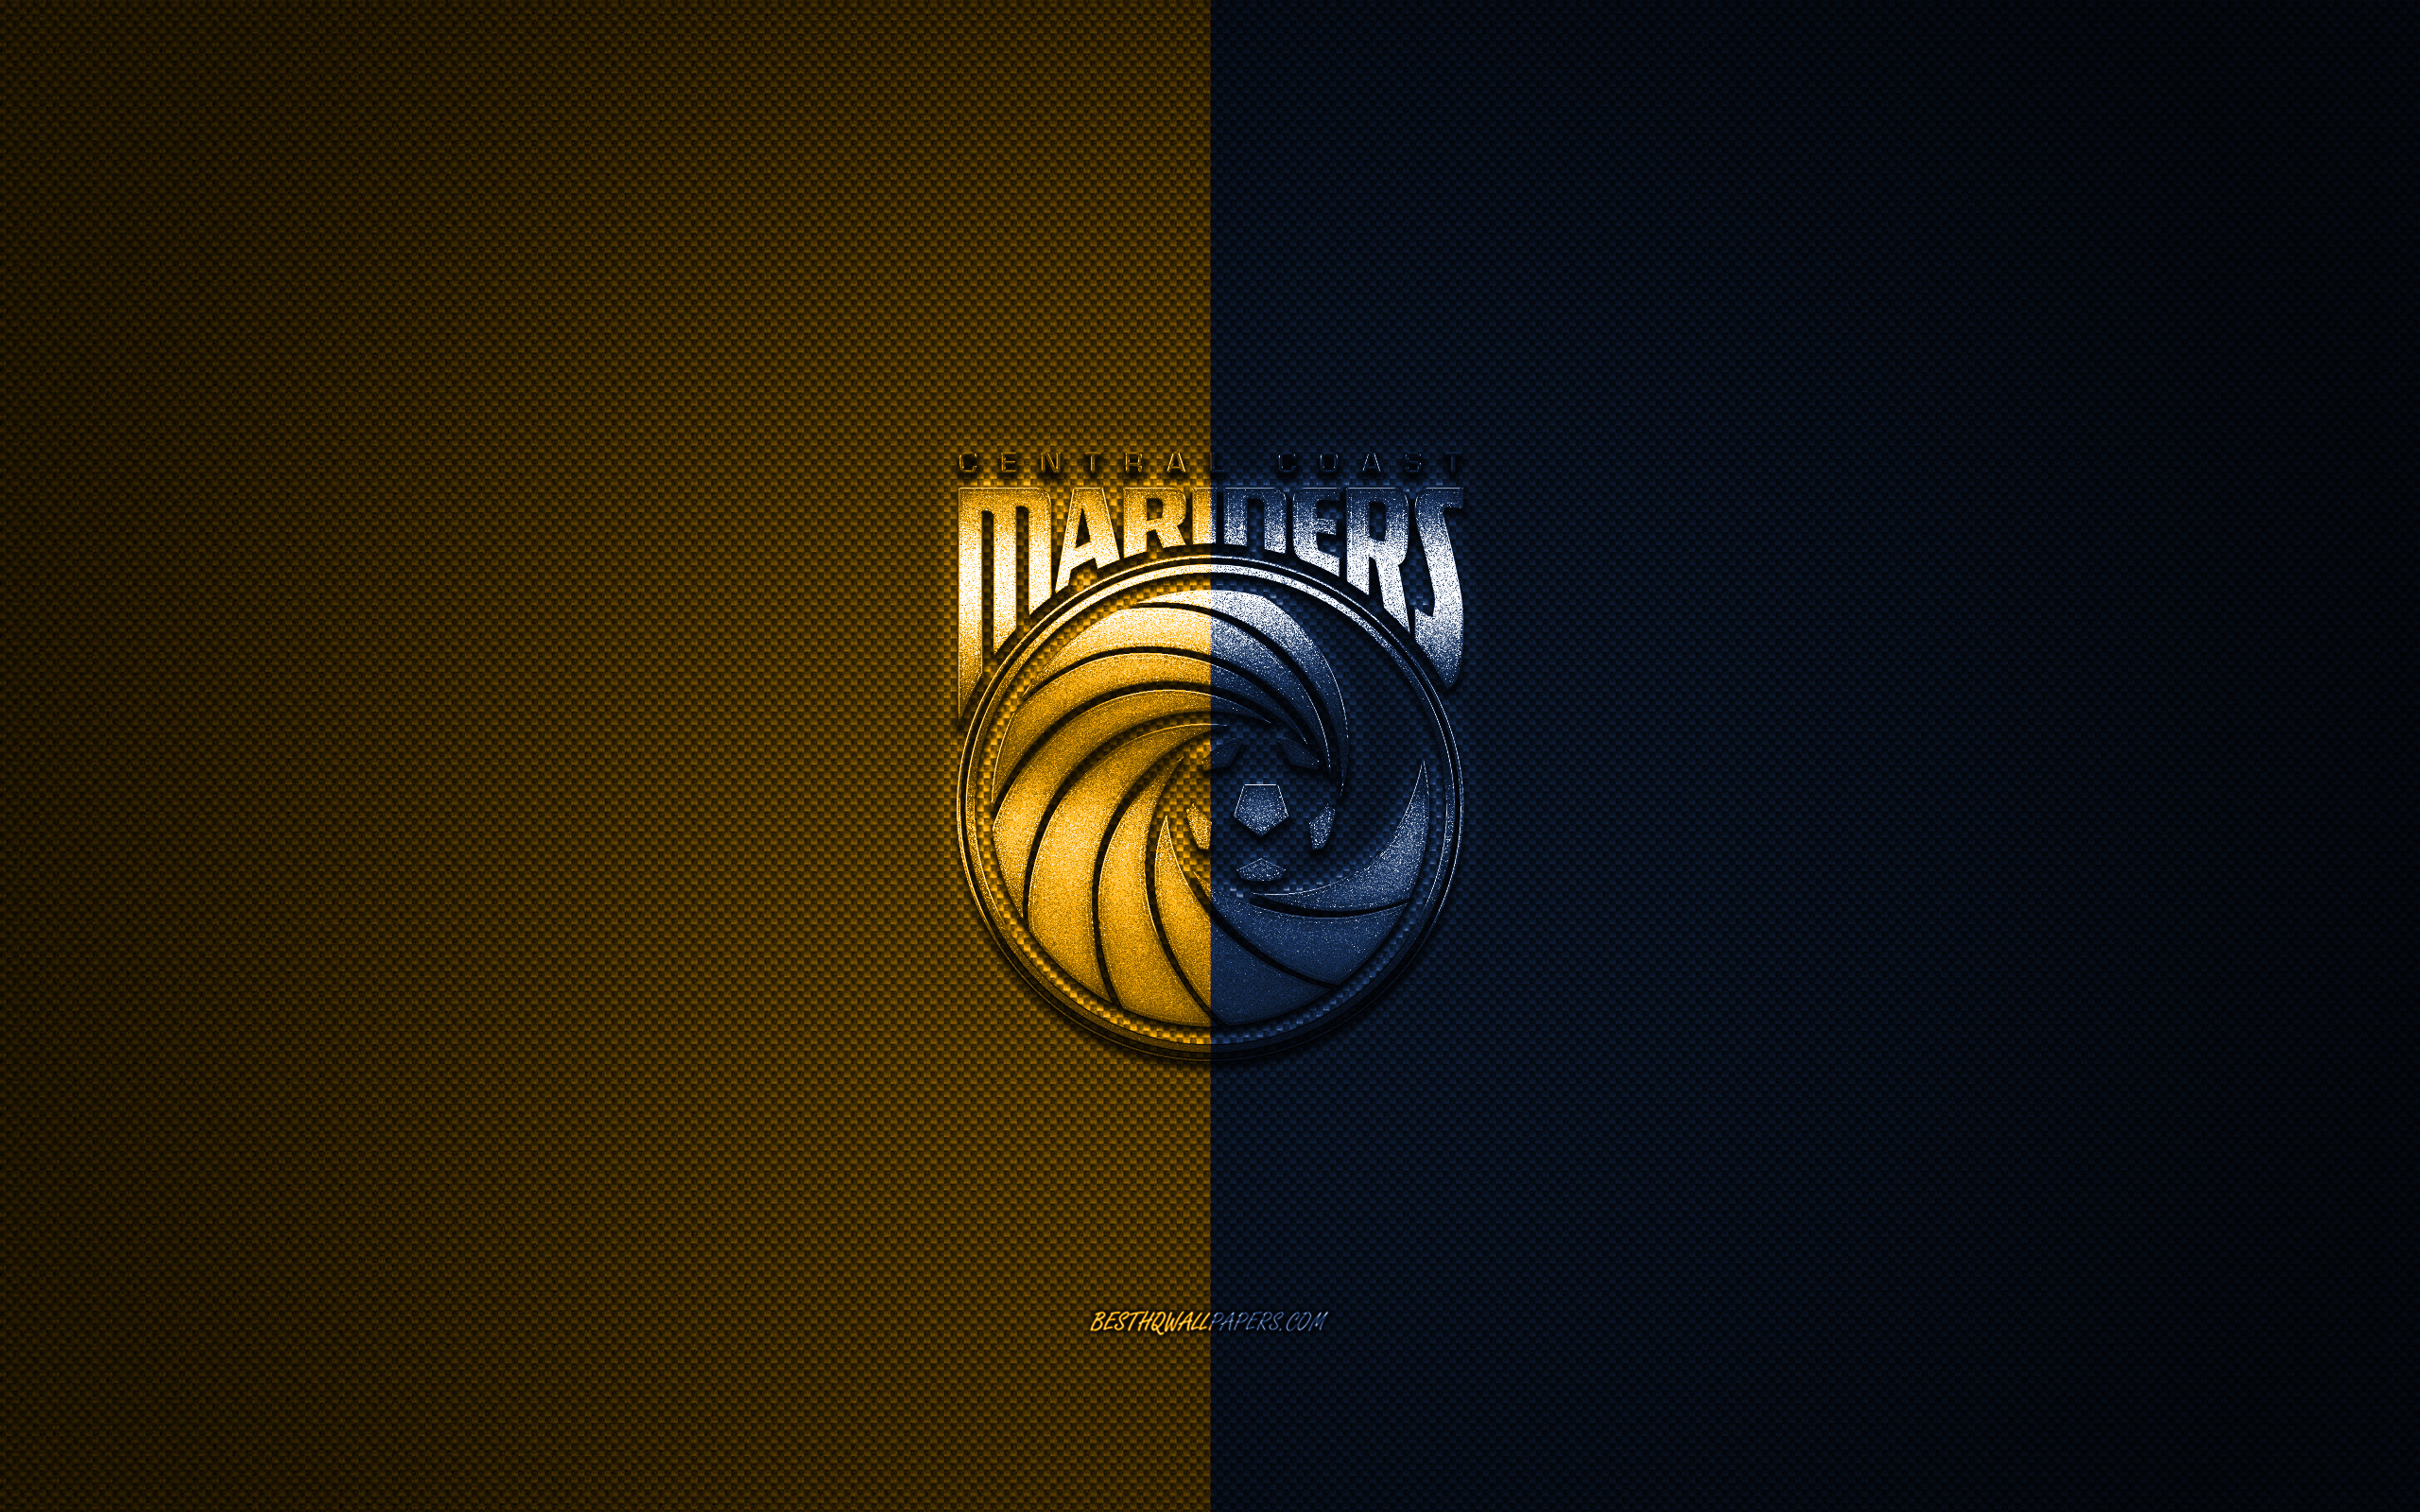 Central Coast Mariners Fc Wallpapers